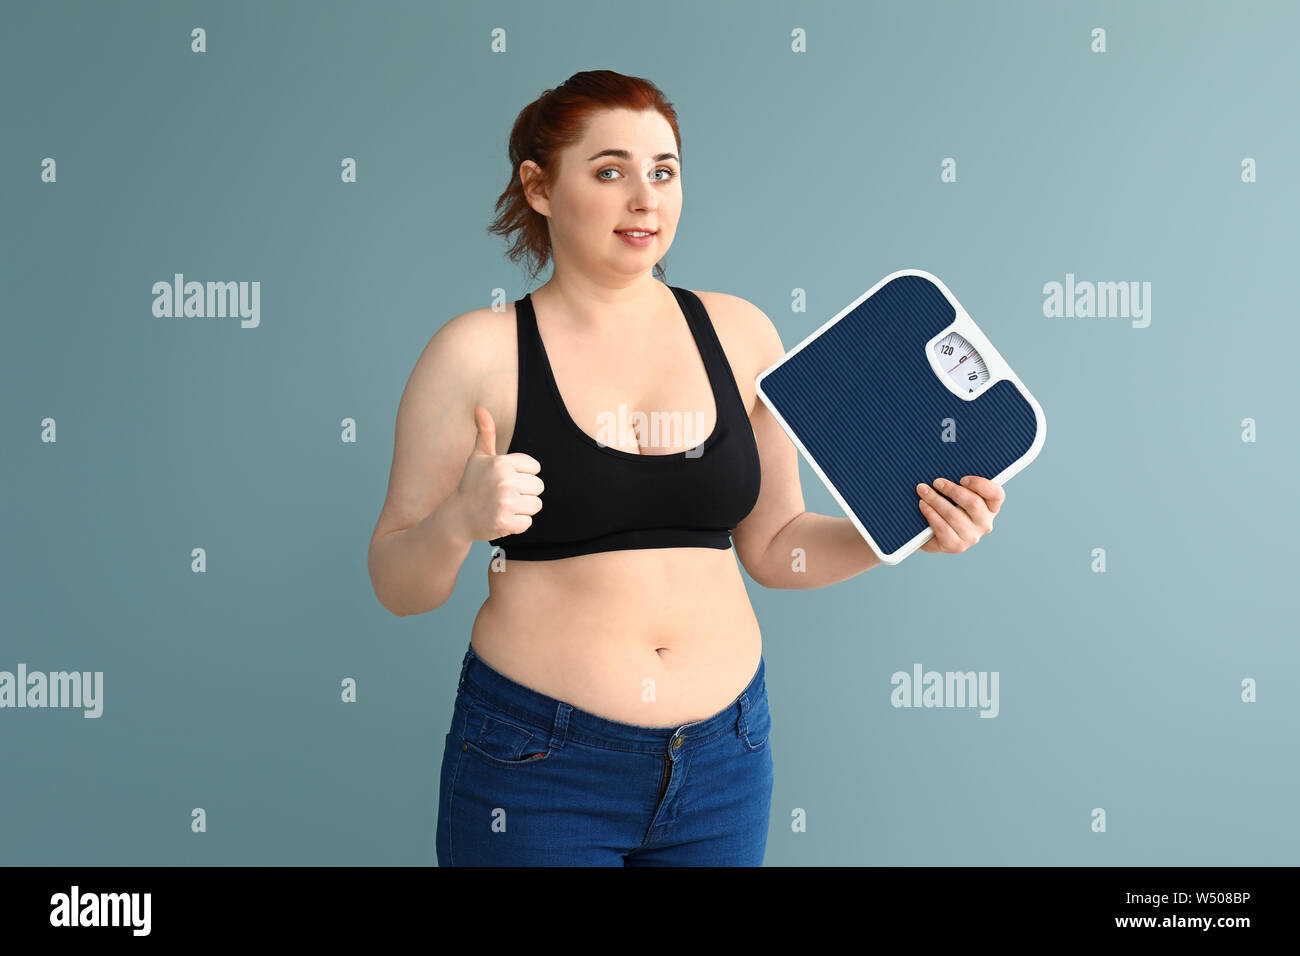 Cheerful proud cute petite woman showing off weight loss figure in